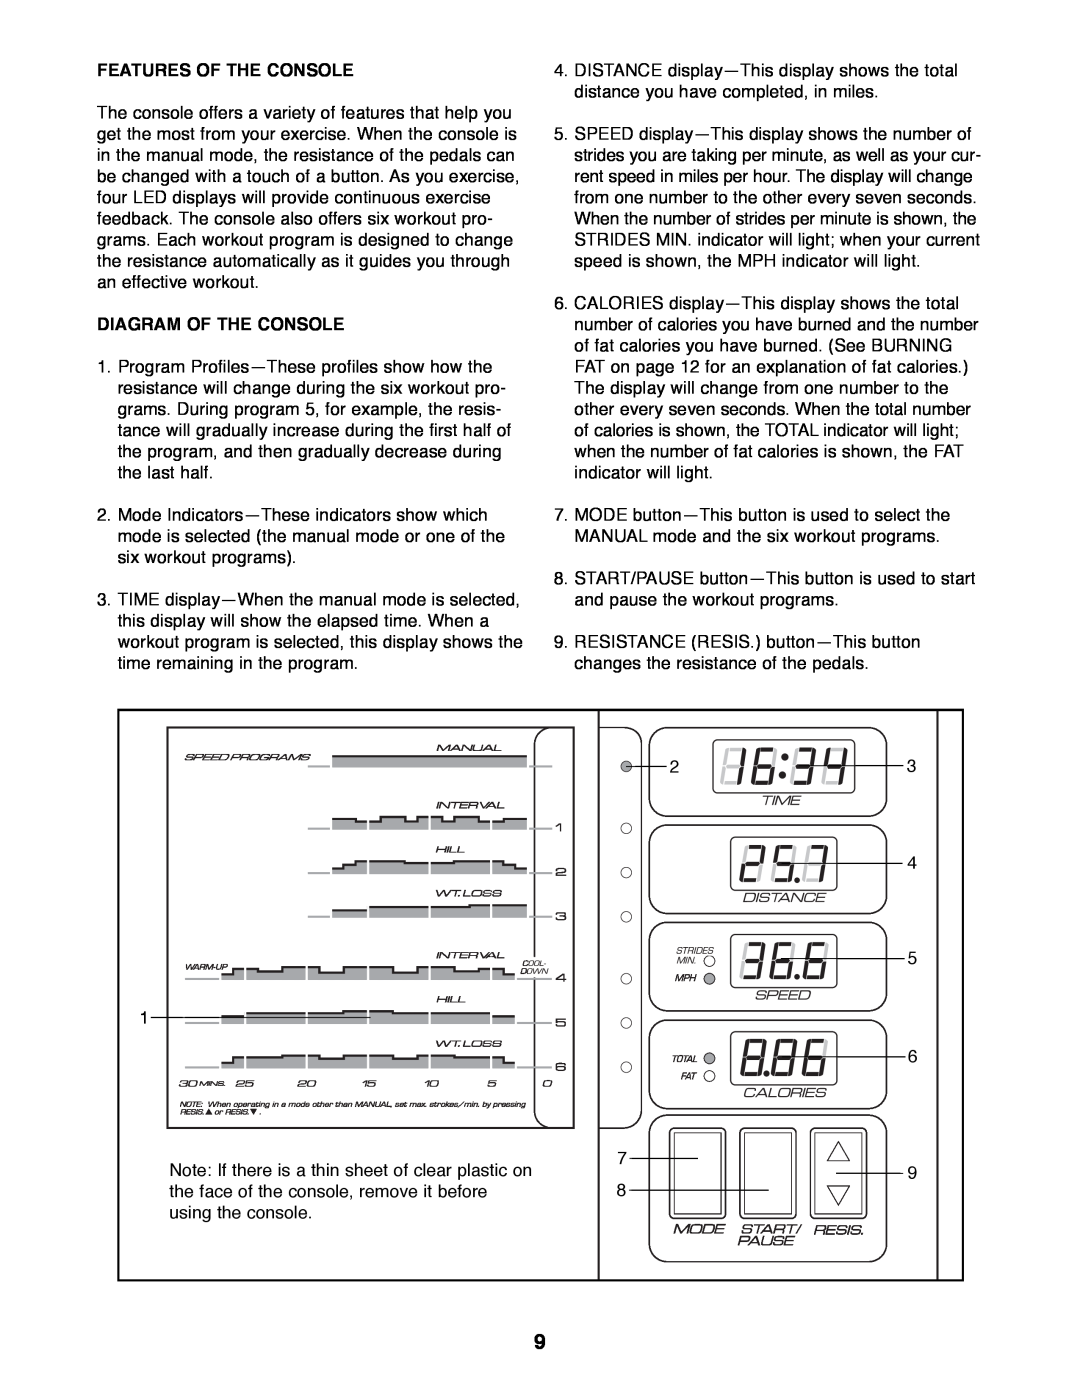 Healthrider HREL89070 manual Features Of The Console, Diagram Of The Console 